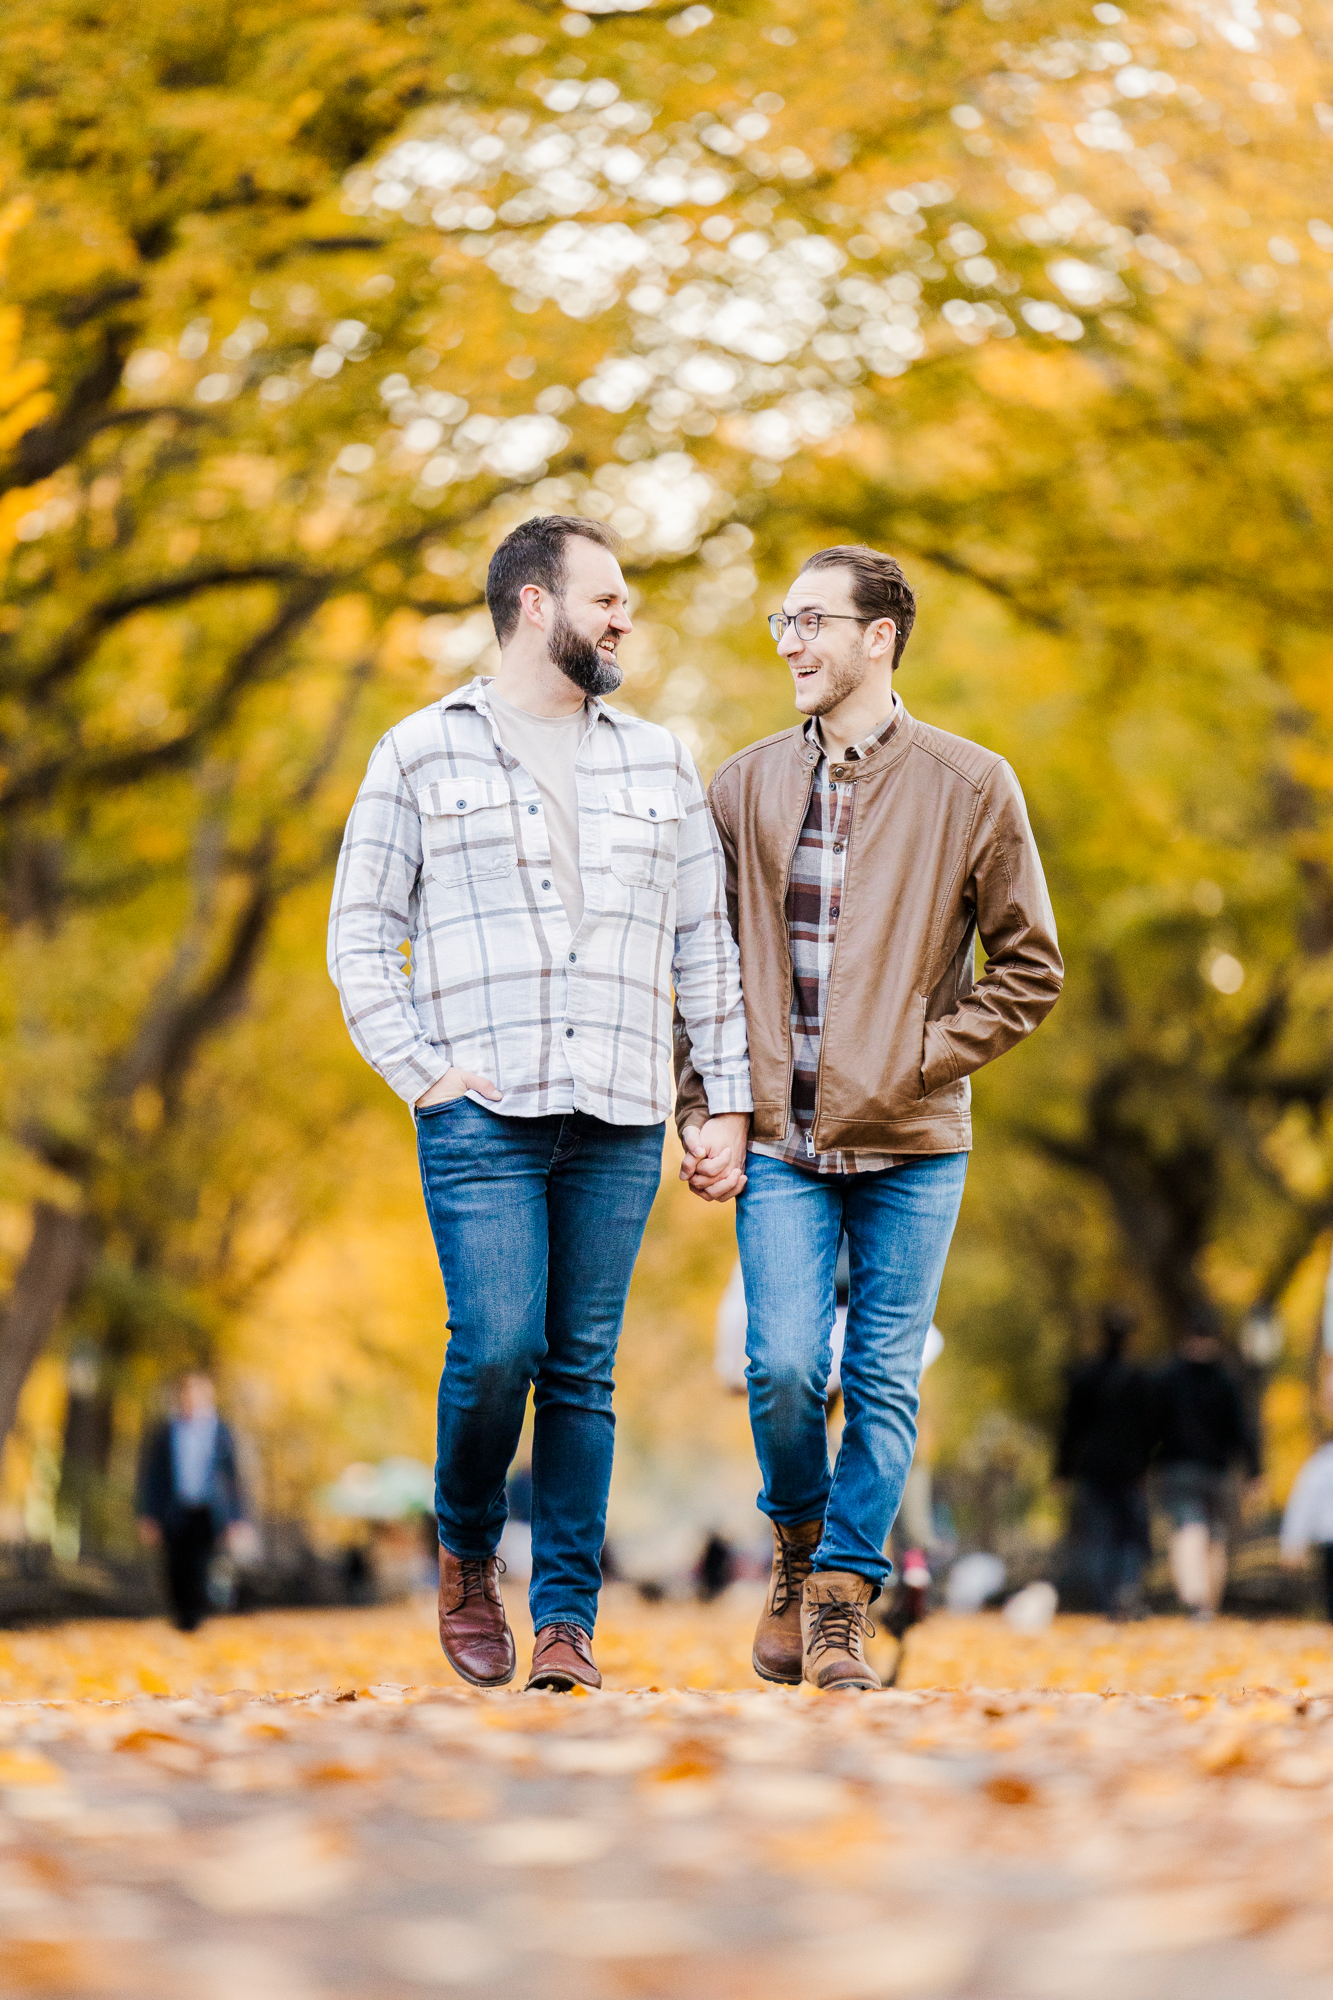 Gorgeous Central Park Engagement Photo Shoot in Fall